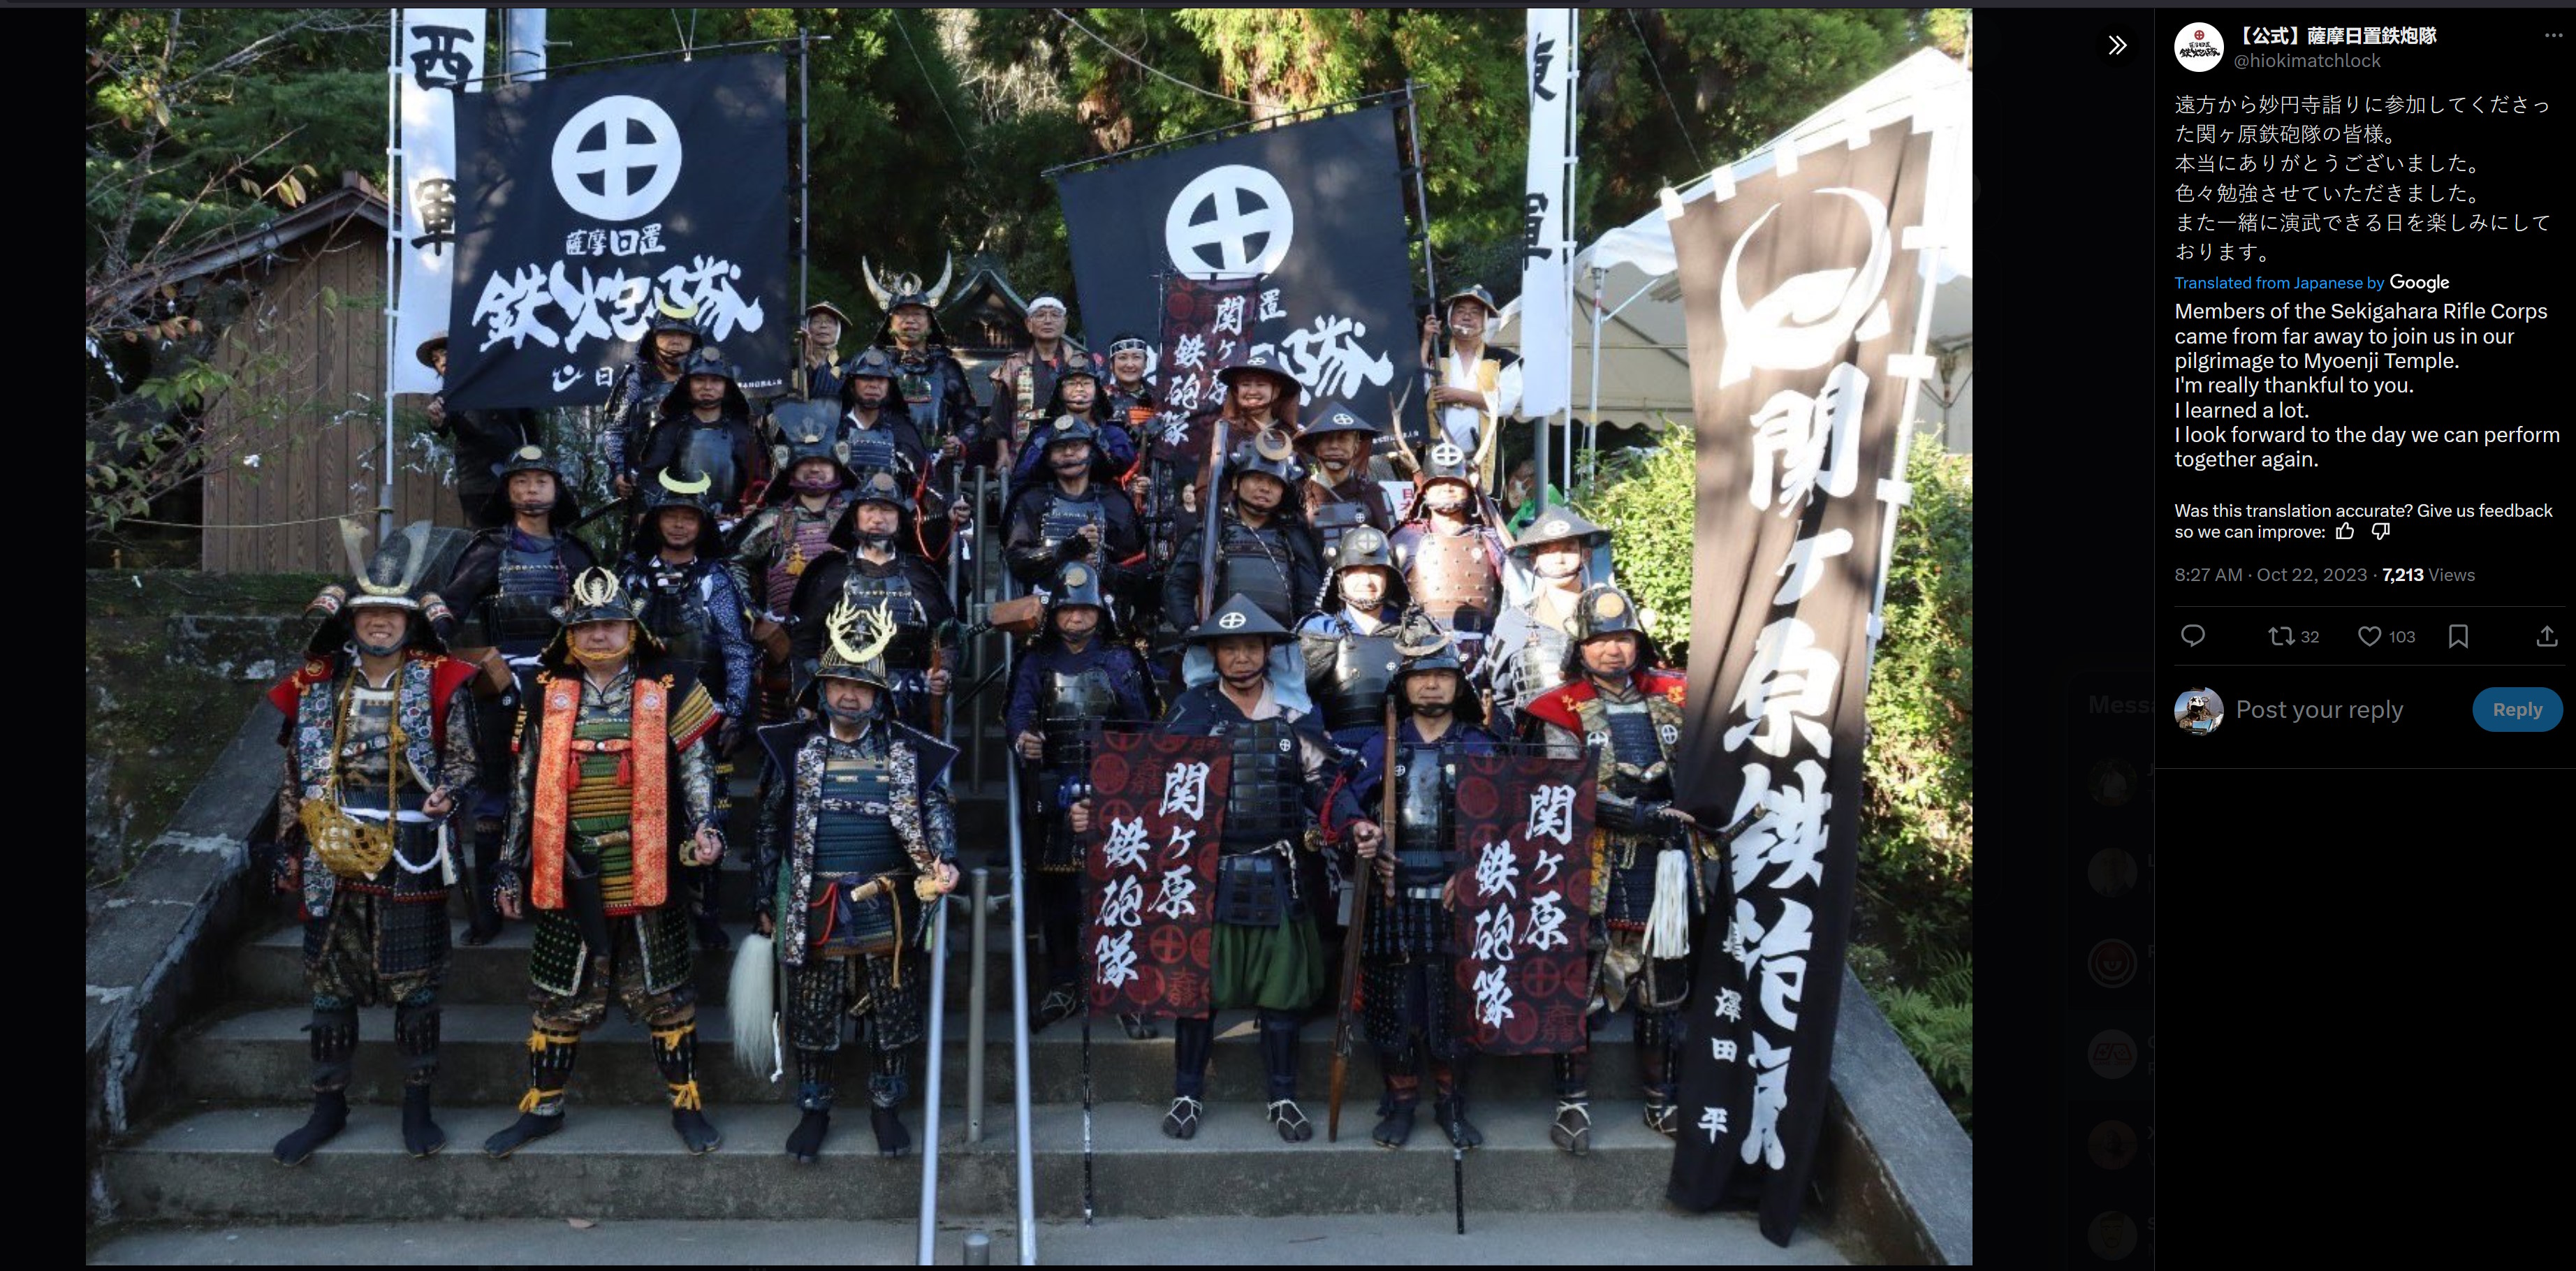 Members of the Sekigahara Rifle Corps came from far away to join us in our pilgrimage to Myoenji Temple. I'm really thankful to you. I learned a lot. I look forward to the day we can perform together again.